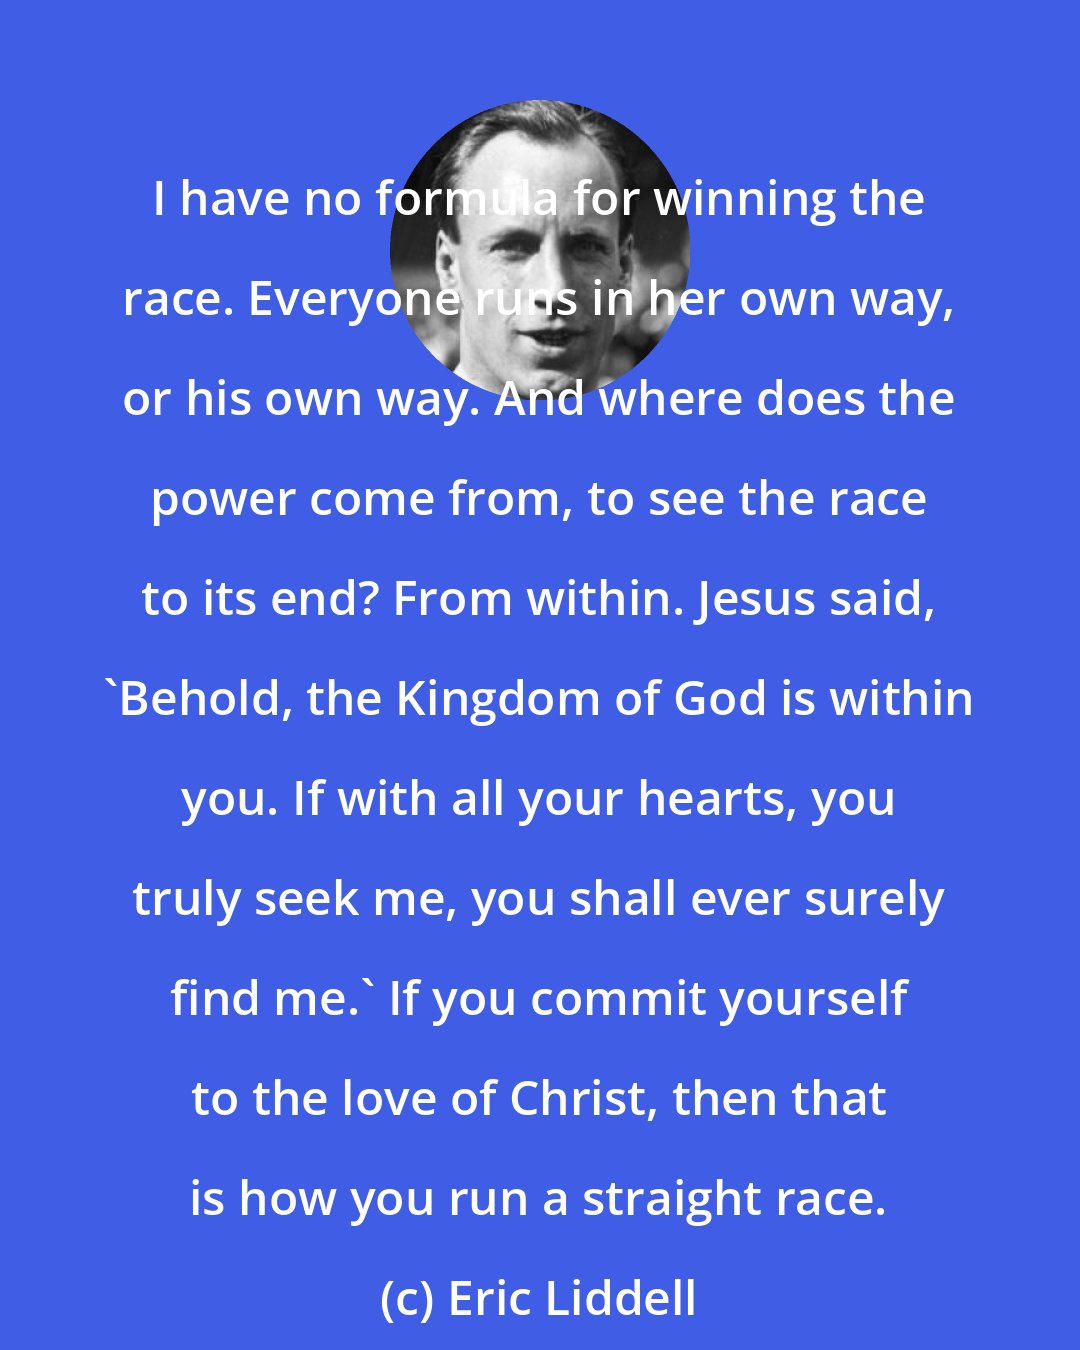 Eric Liddell: I have no formula for winning the race. Everyone runs in her own way, or his own way. And where does the power come from, to see the race to its end? From within. Jesus said, 'Behold, the Kingdom of God is within you. If with all your hearts, you truly seek me, you shall ever surely find me.' If you commit yourself to the love of Christ, then that is how you run a straight race.